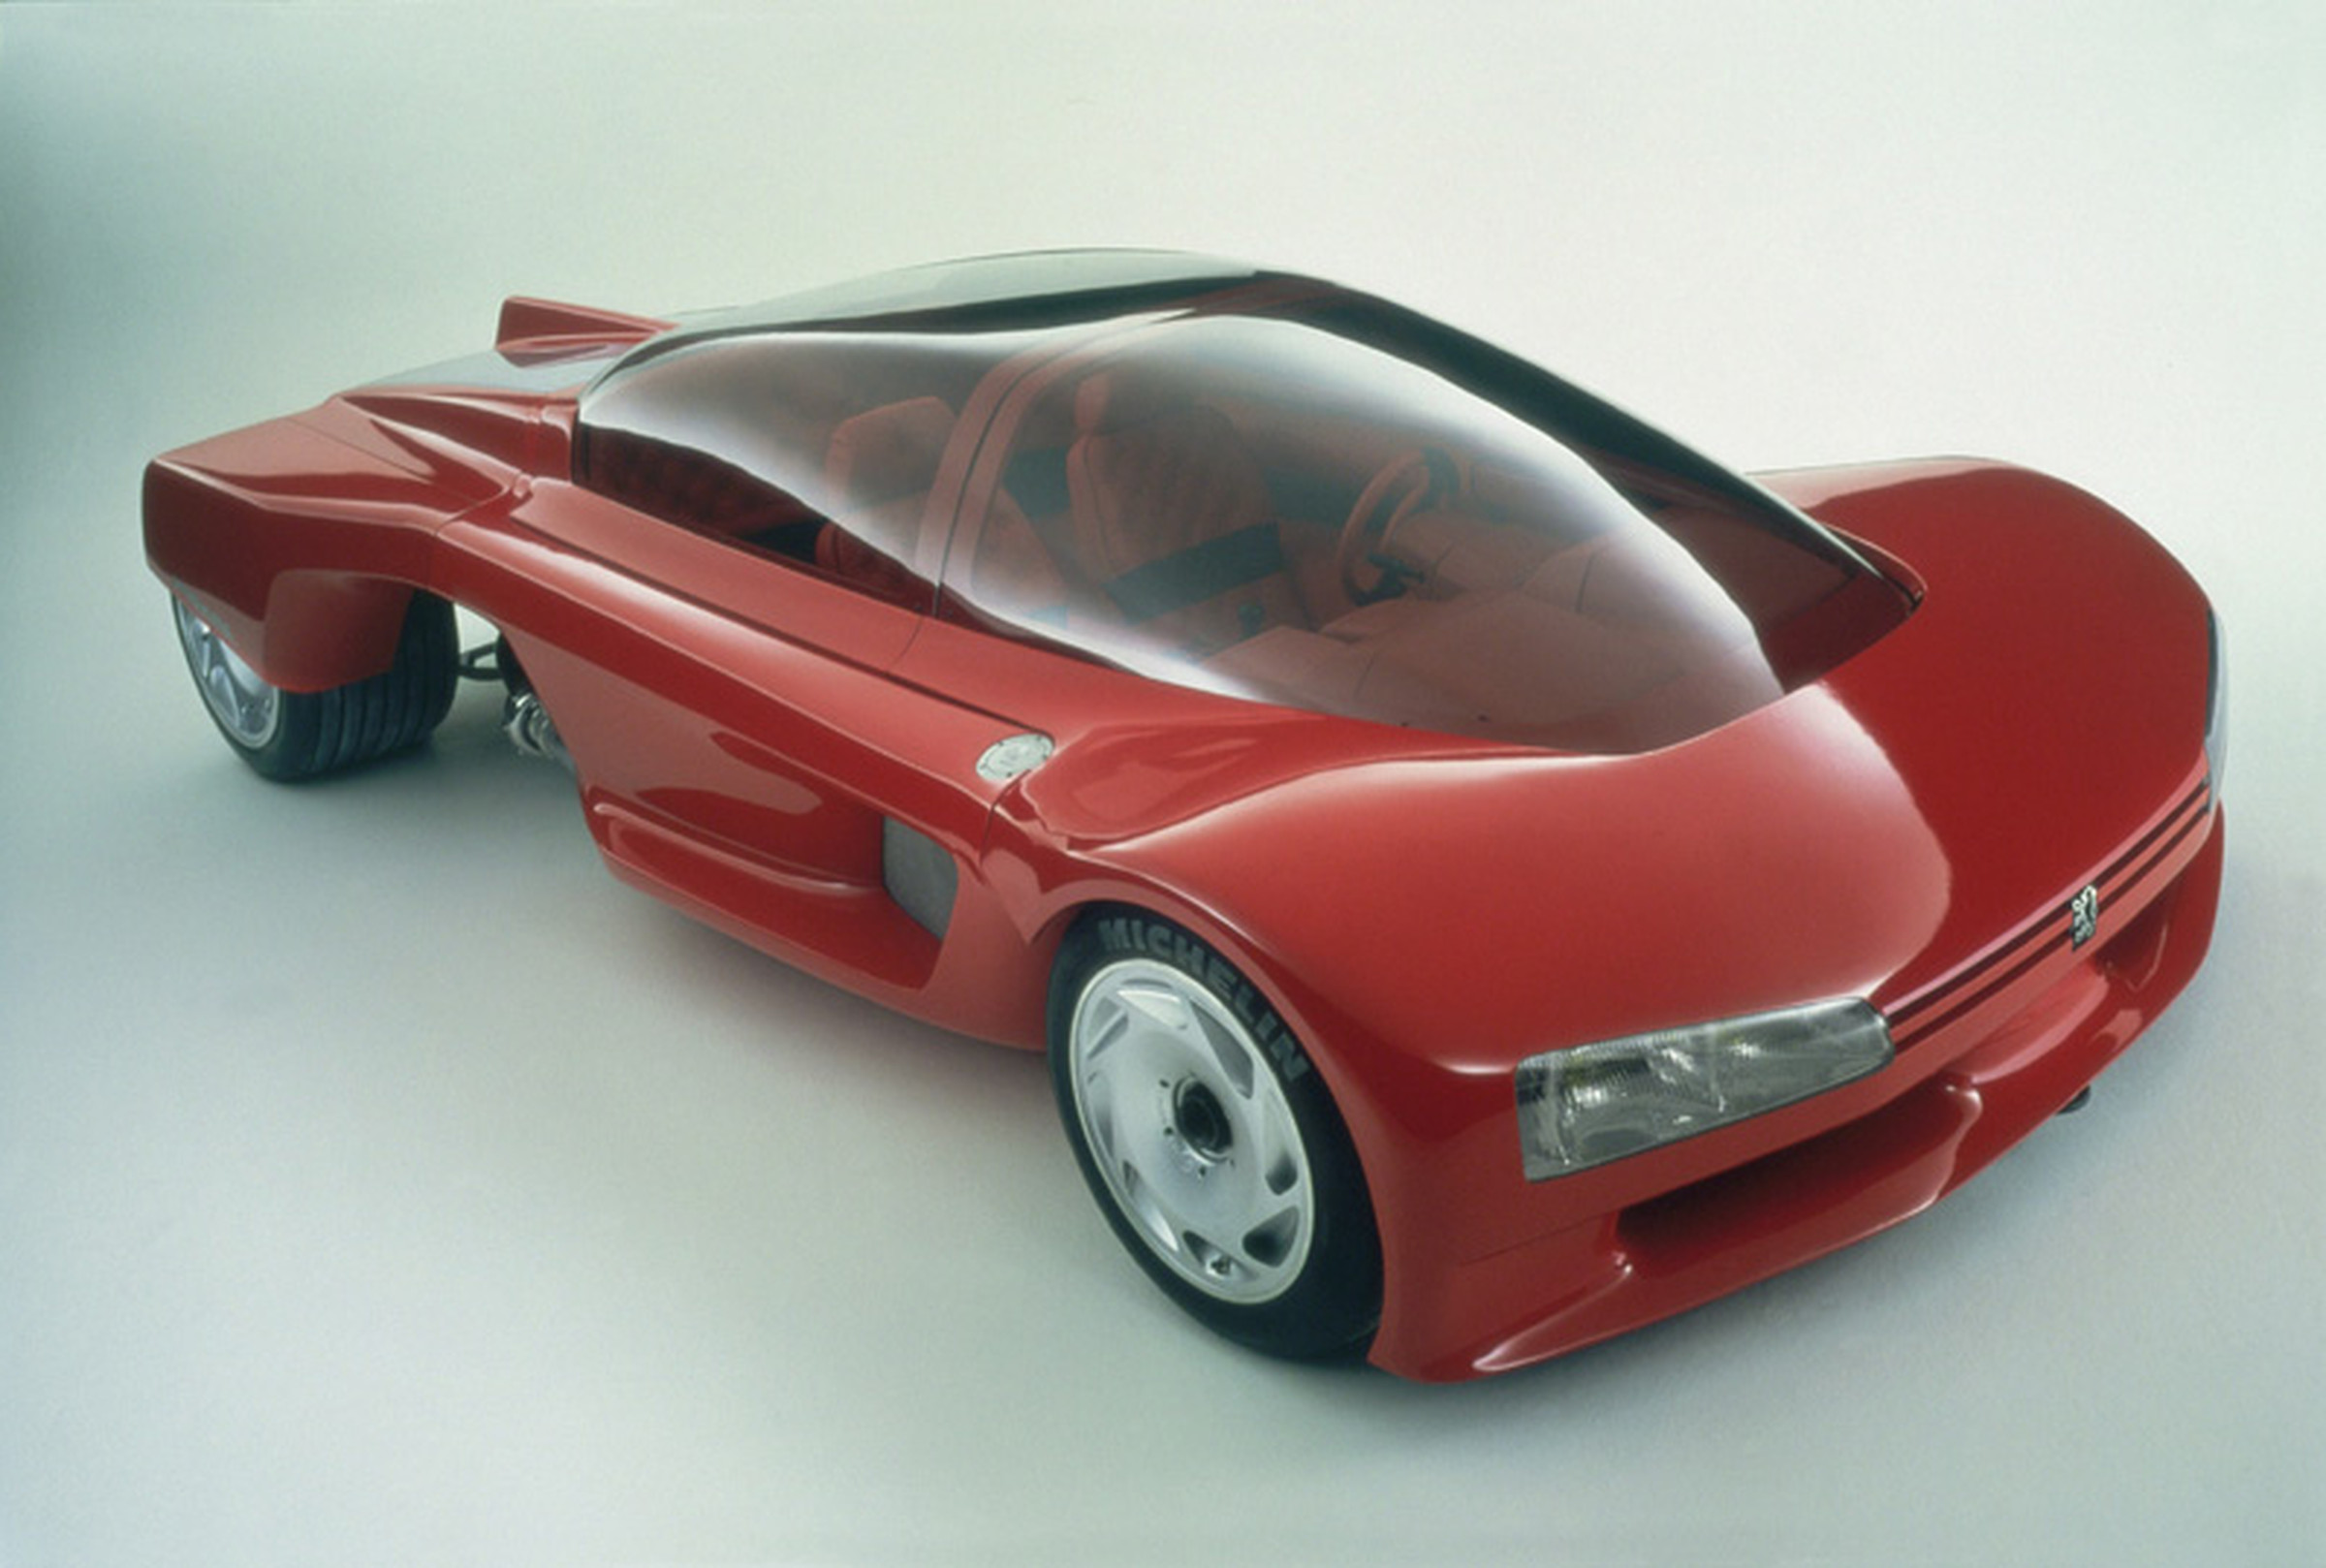 Previous Peugeot concepts, such as the Proxima (1986), aspired to a more space age future. 